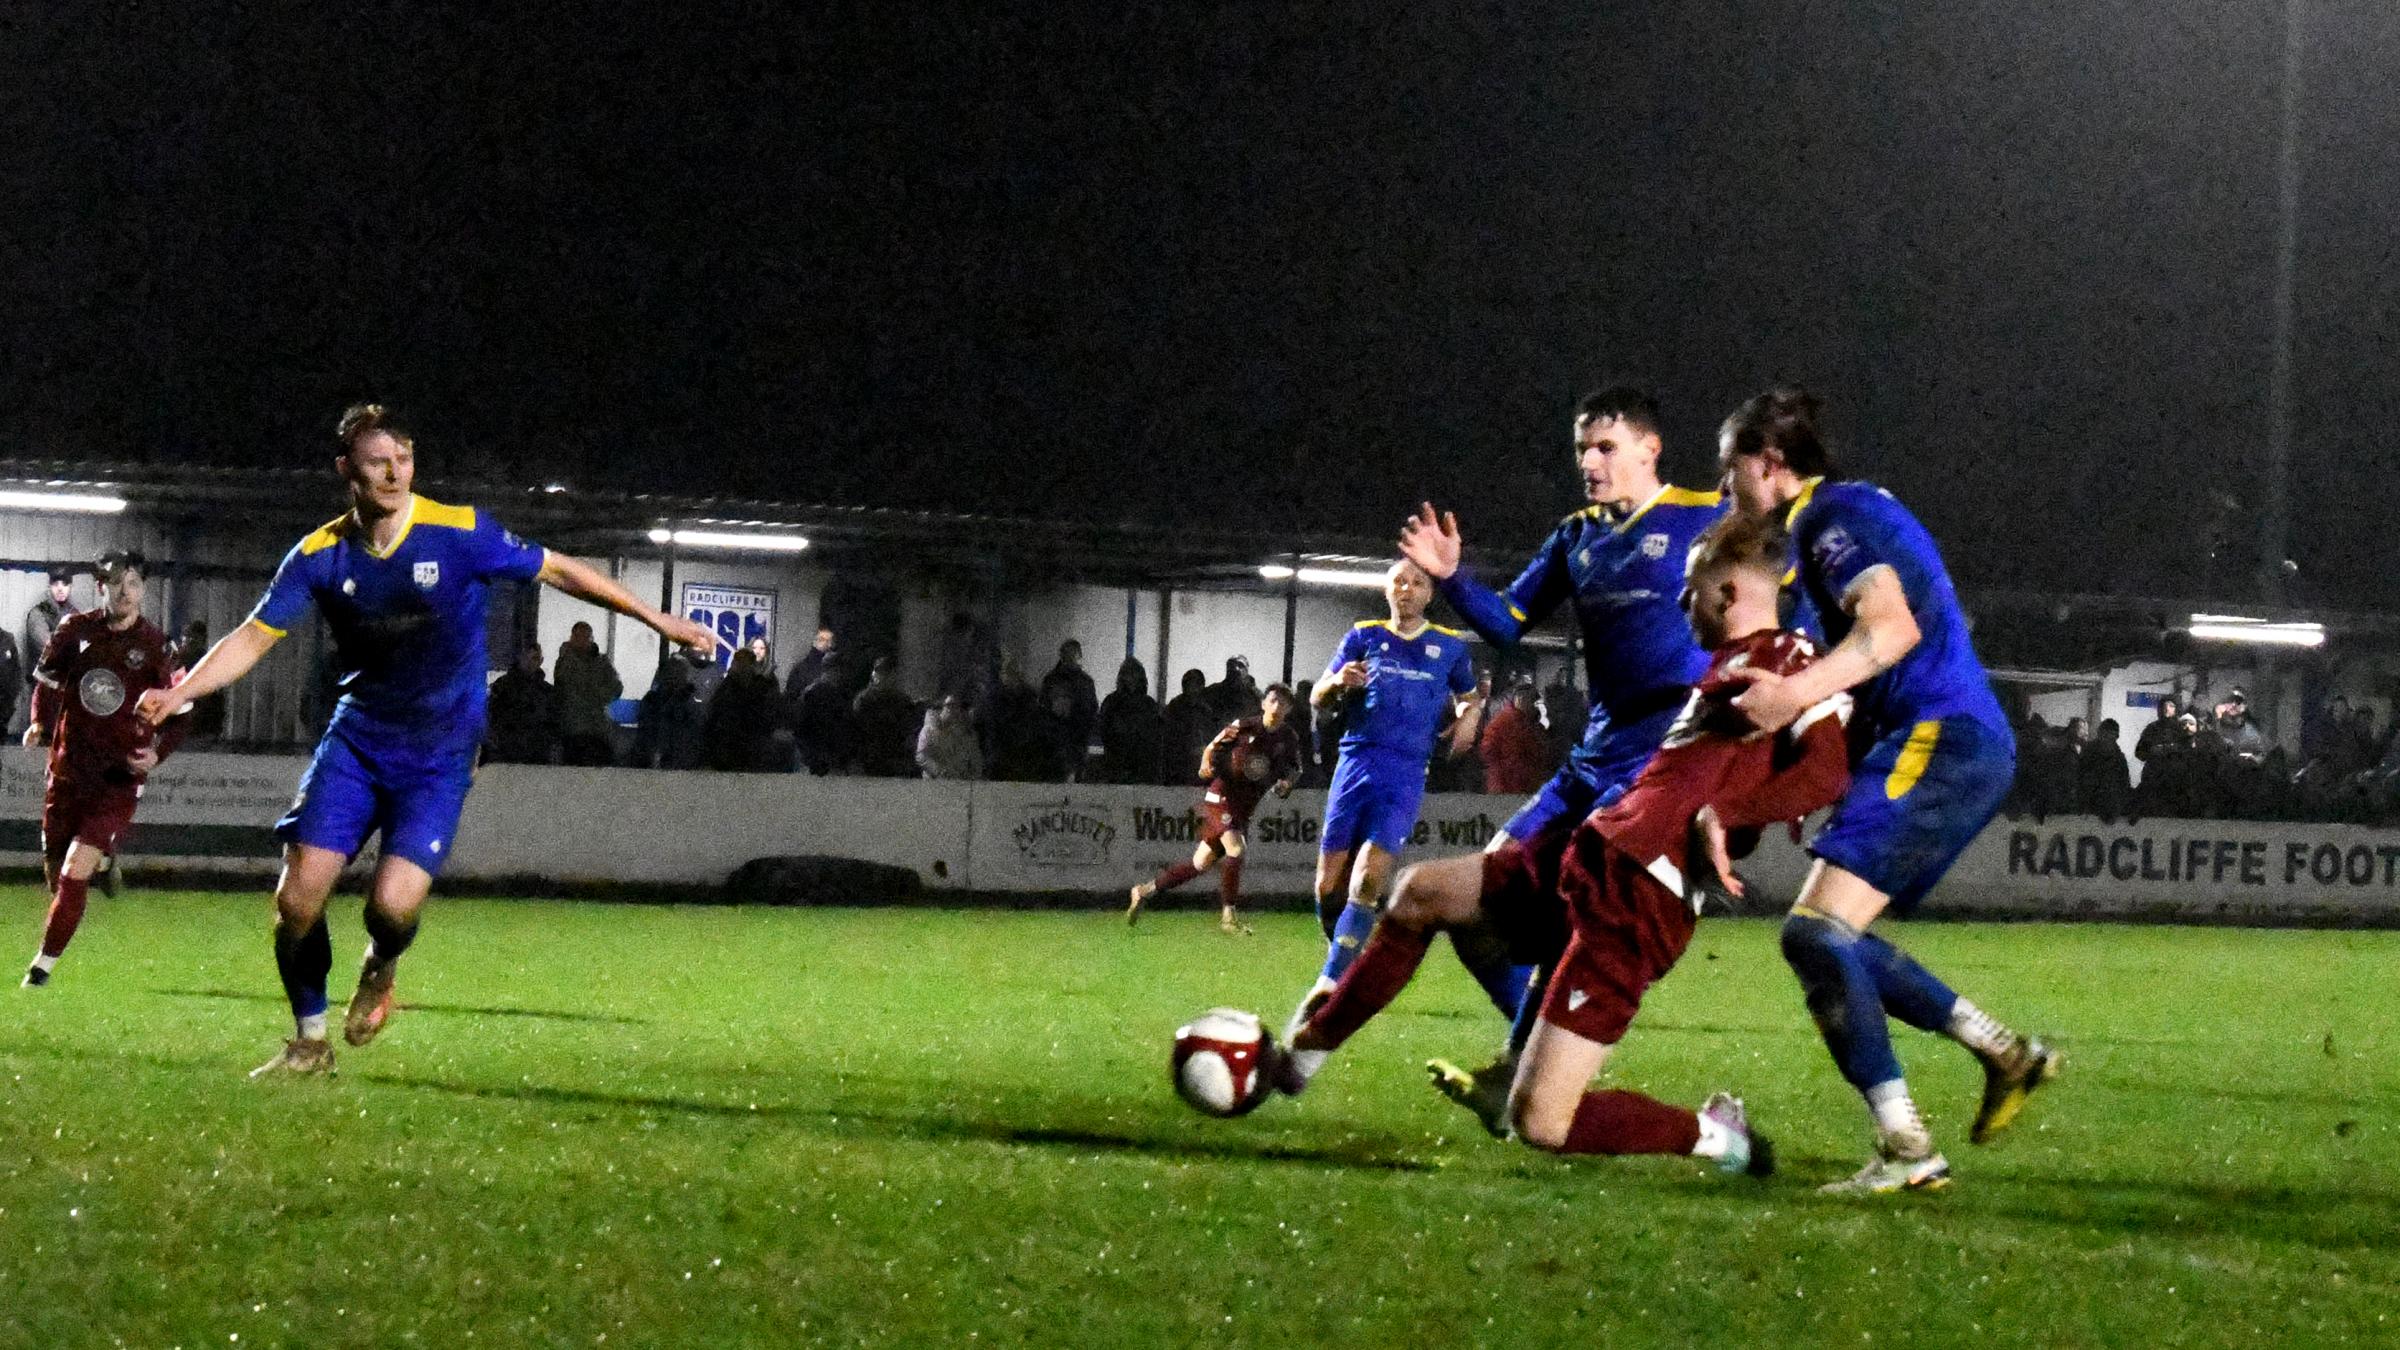 Late Radcliffe double denies Colls a famous away win